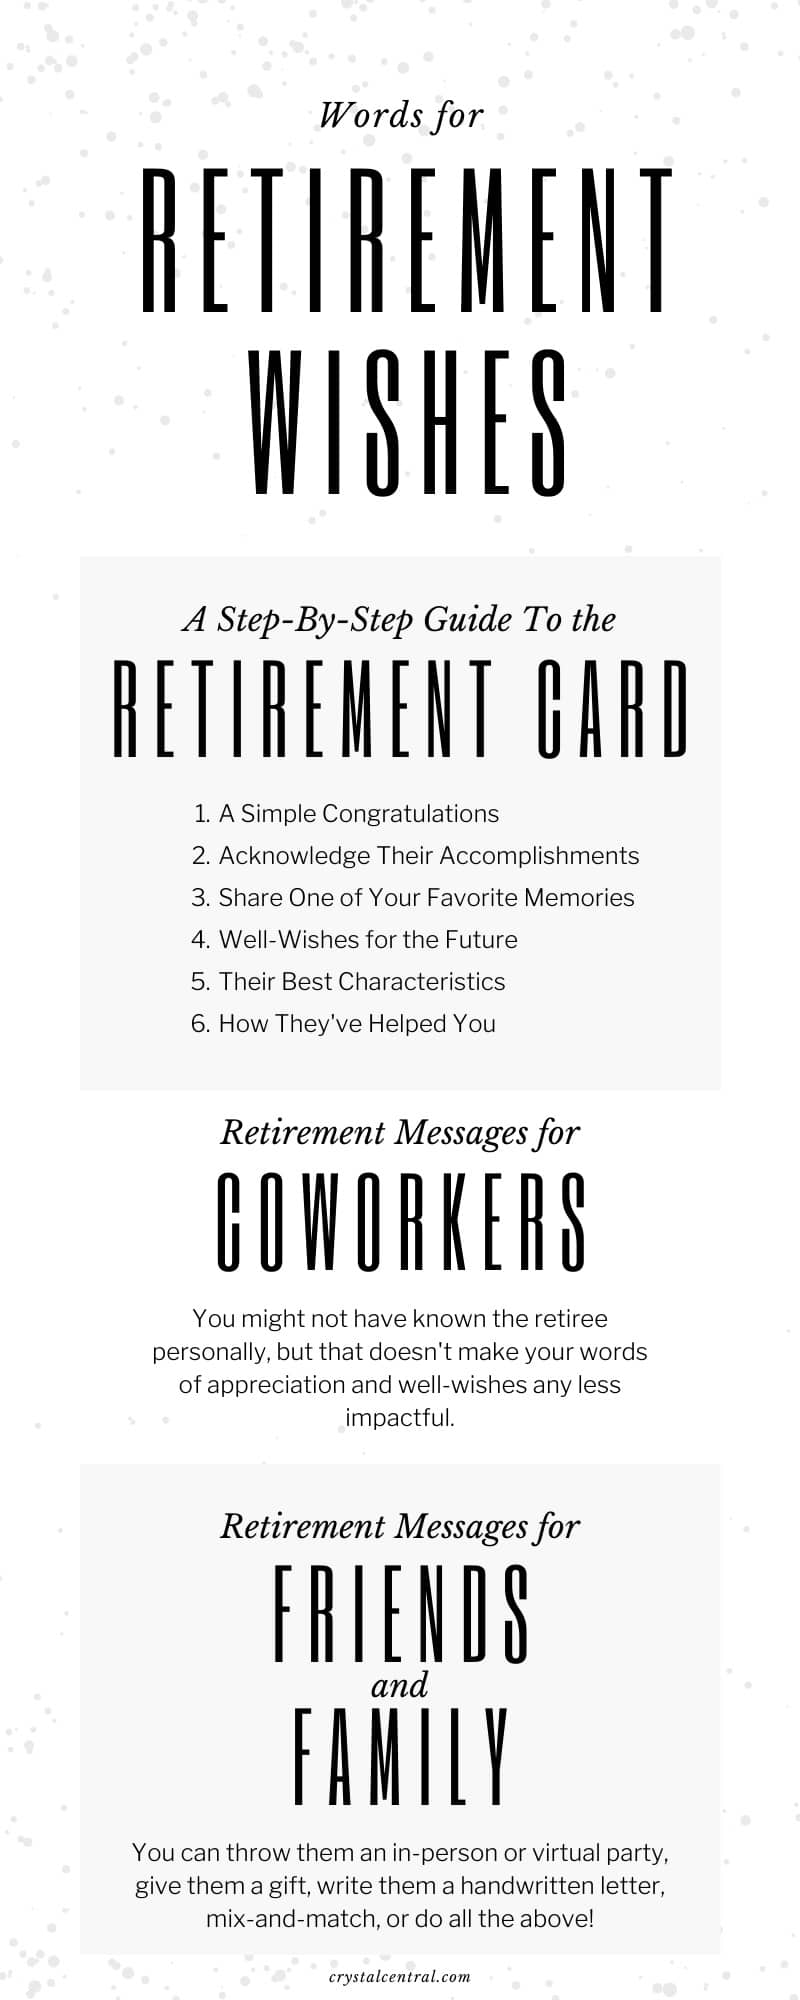 Words for Retirement Wishes